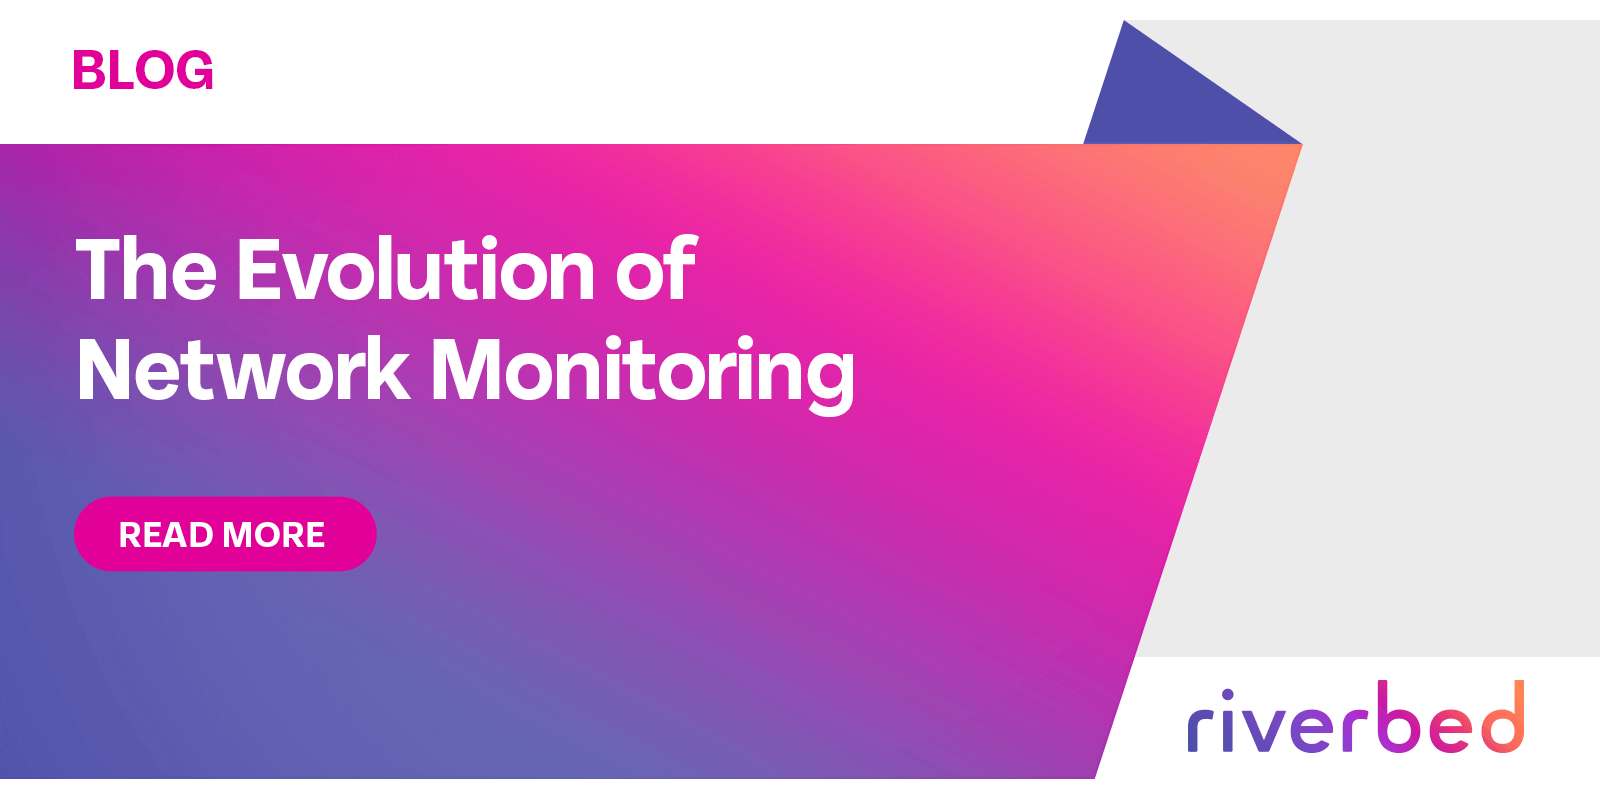 The Evolution of Network Monitoring